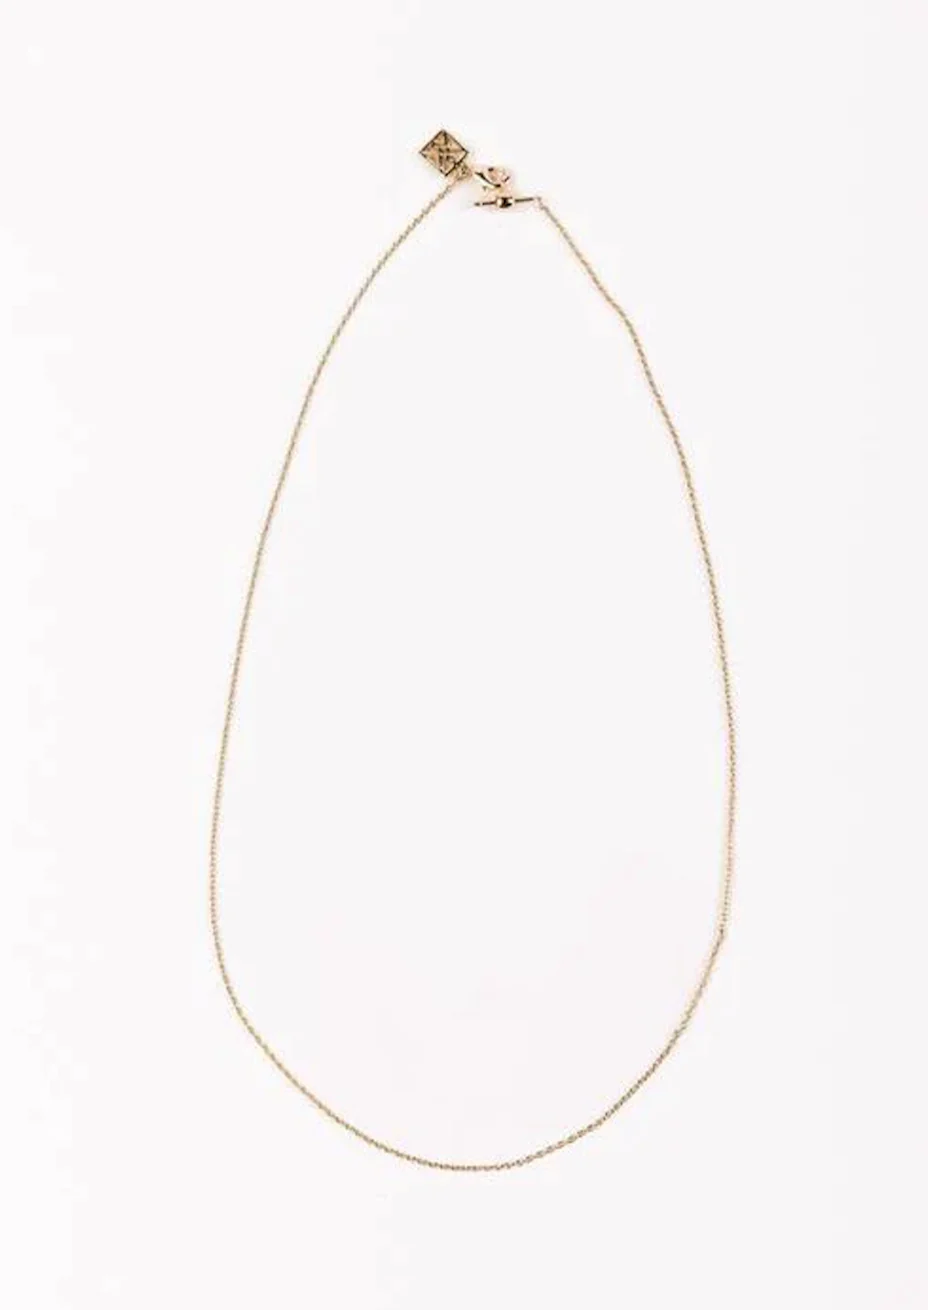 Michelle Mcdowell Initial & Charm Bar Necklace